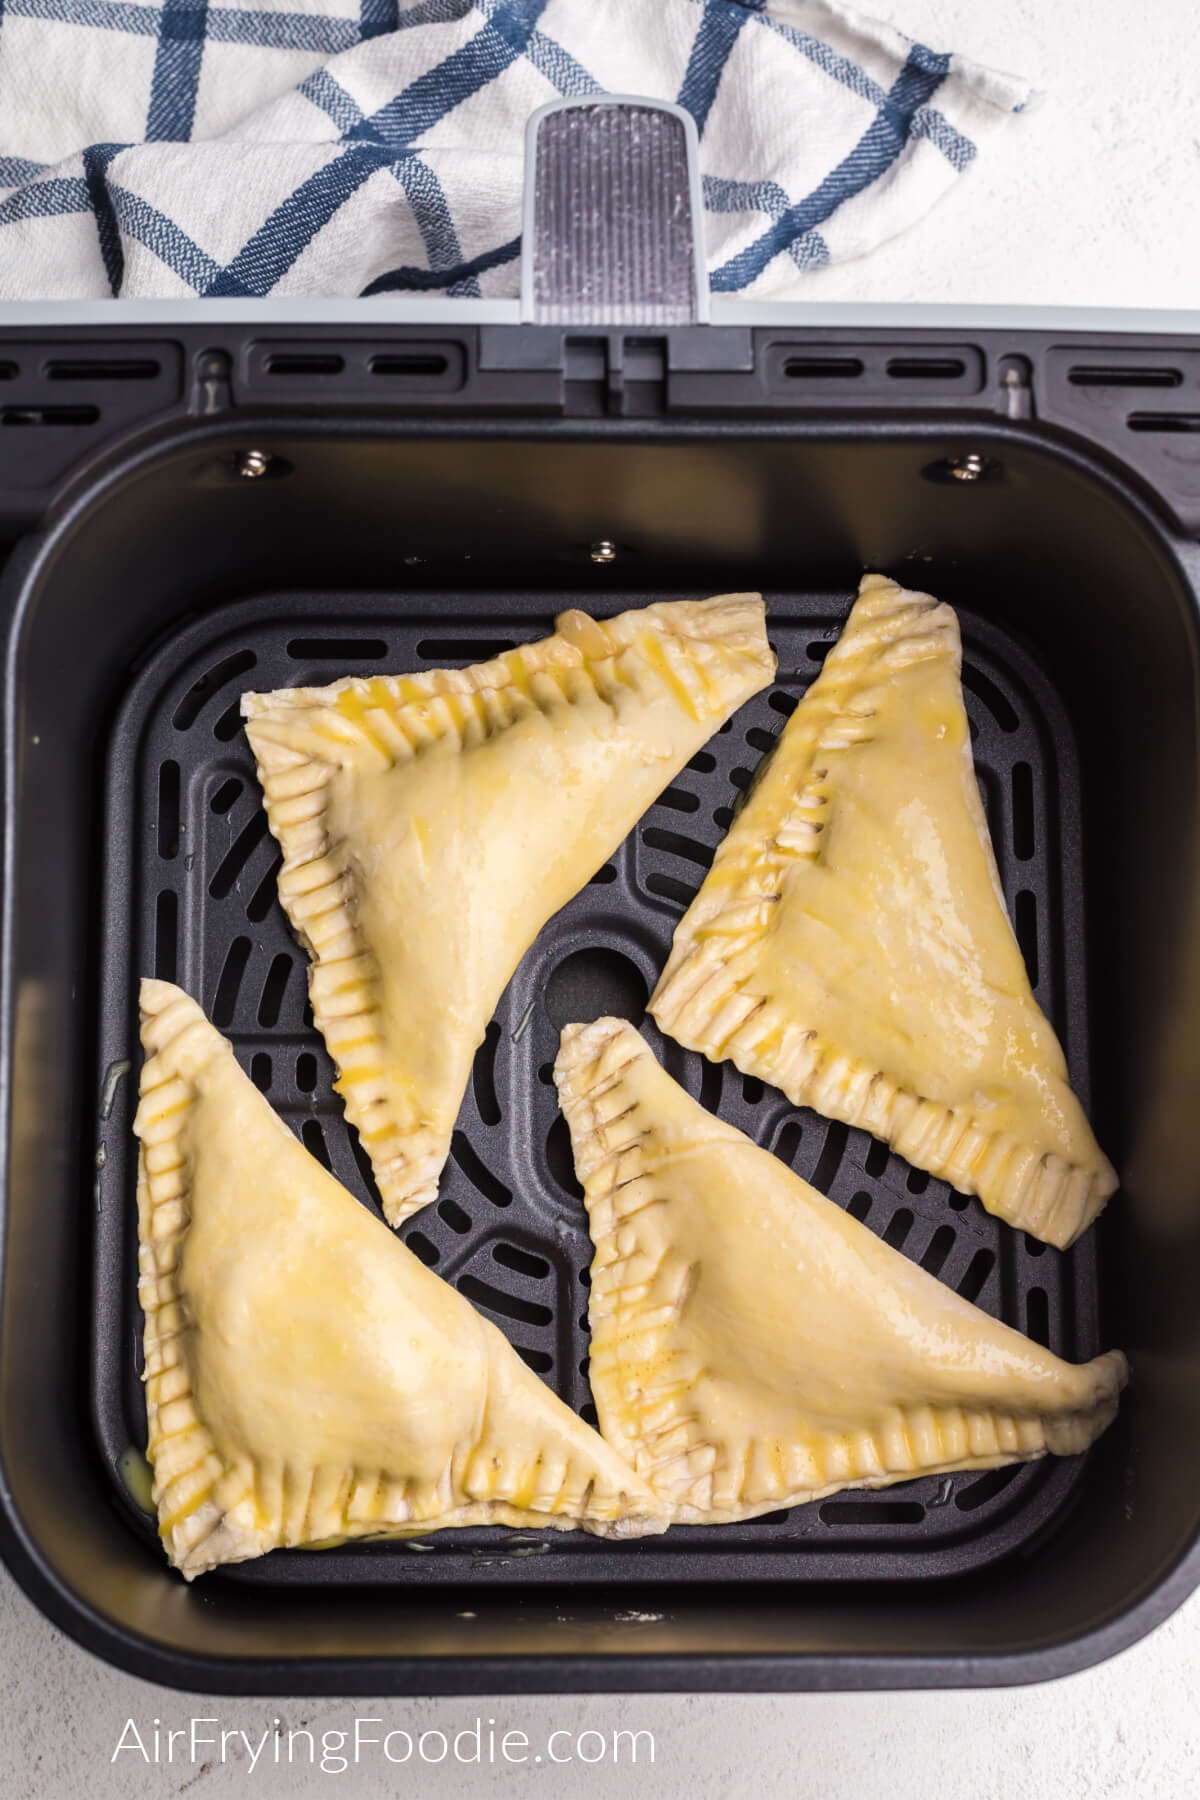 Apple turnovers in the basket of the air fryer.